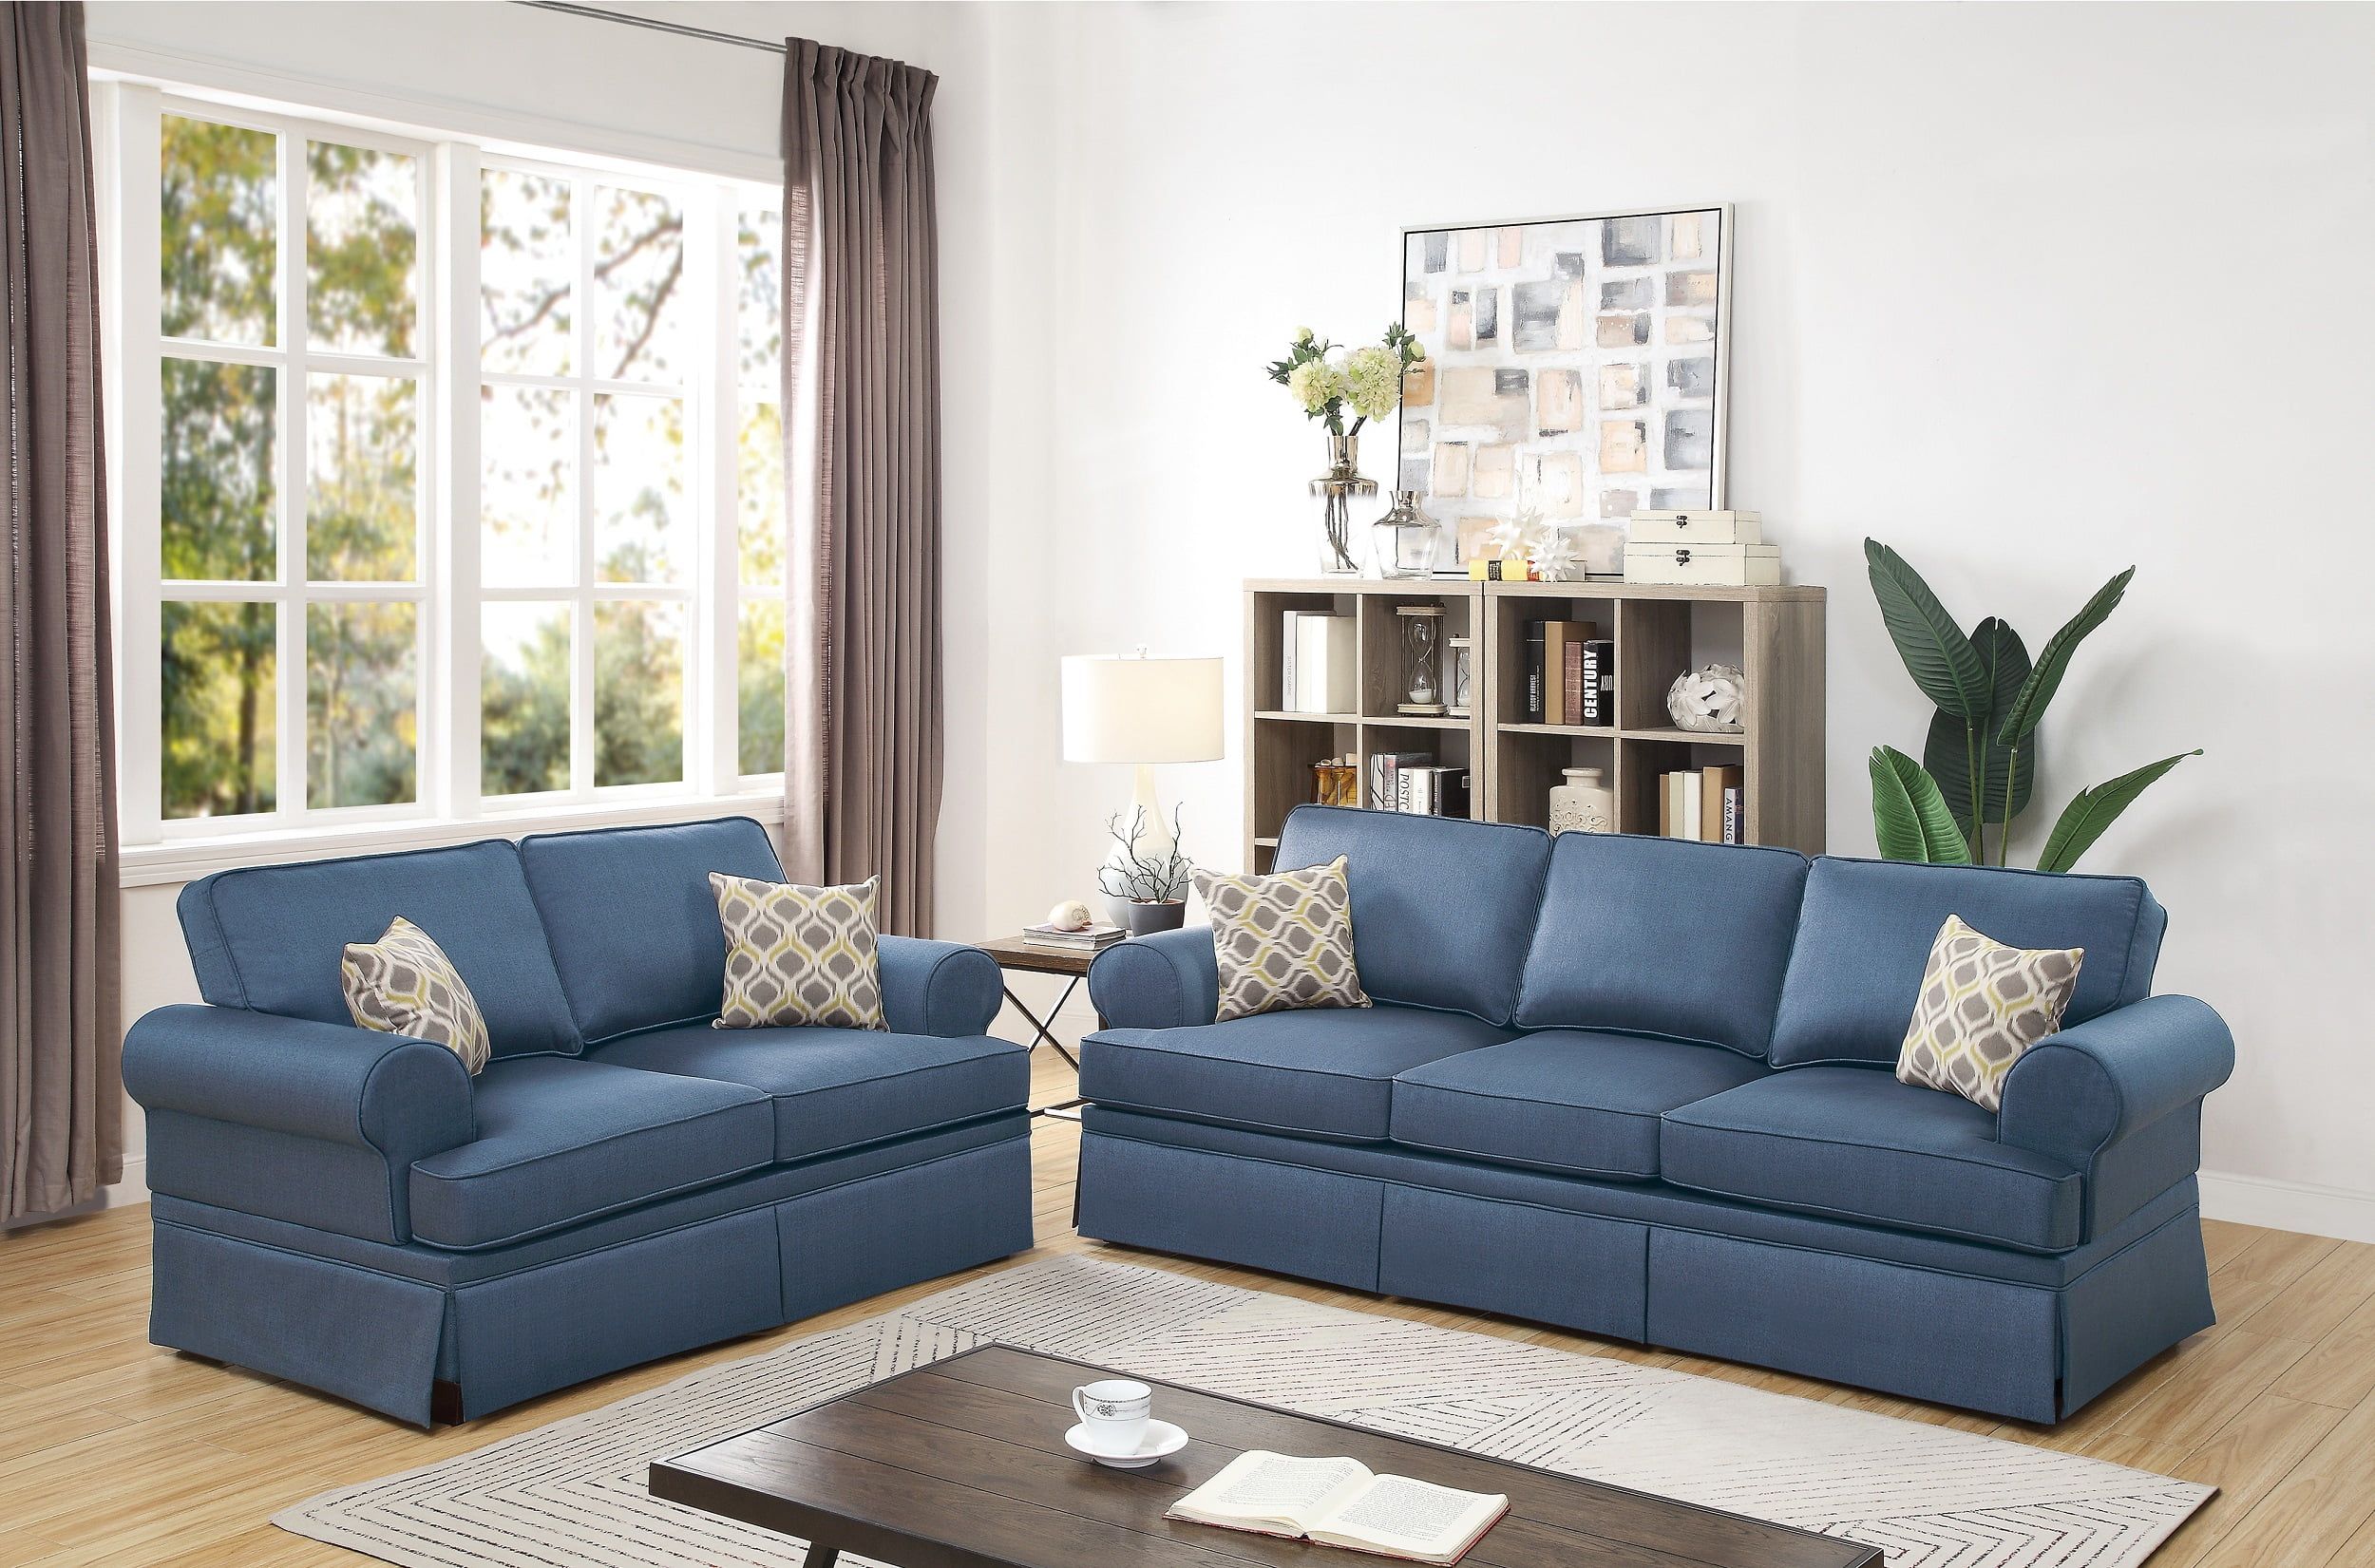 Classic Comfort Cozy Living Room 2pc Sofa Set Sofa And Loveseat Blue Within Sofas For Living Rooms (Gallery 1 of 20)